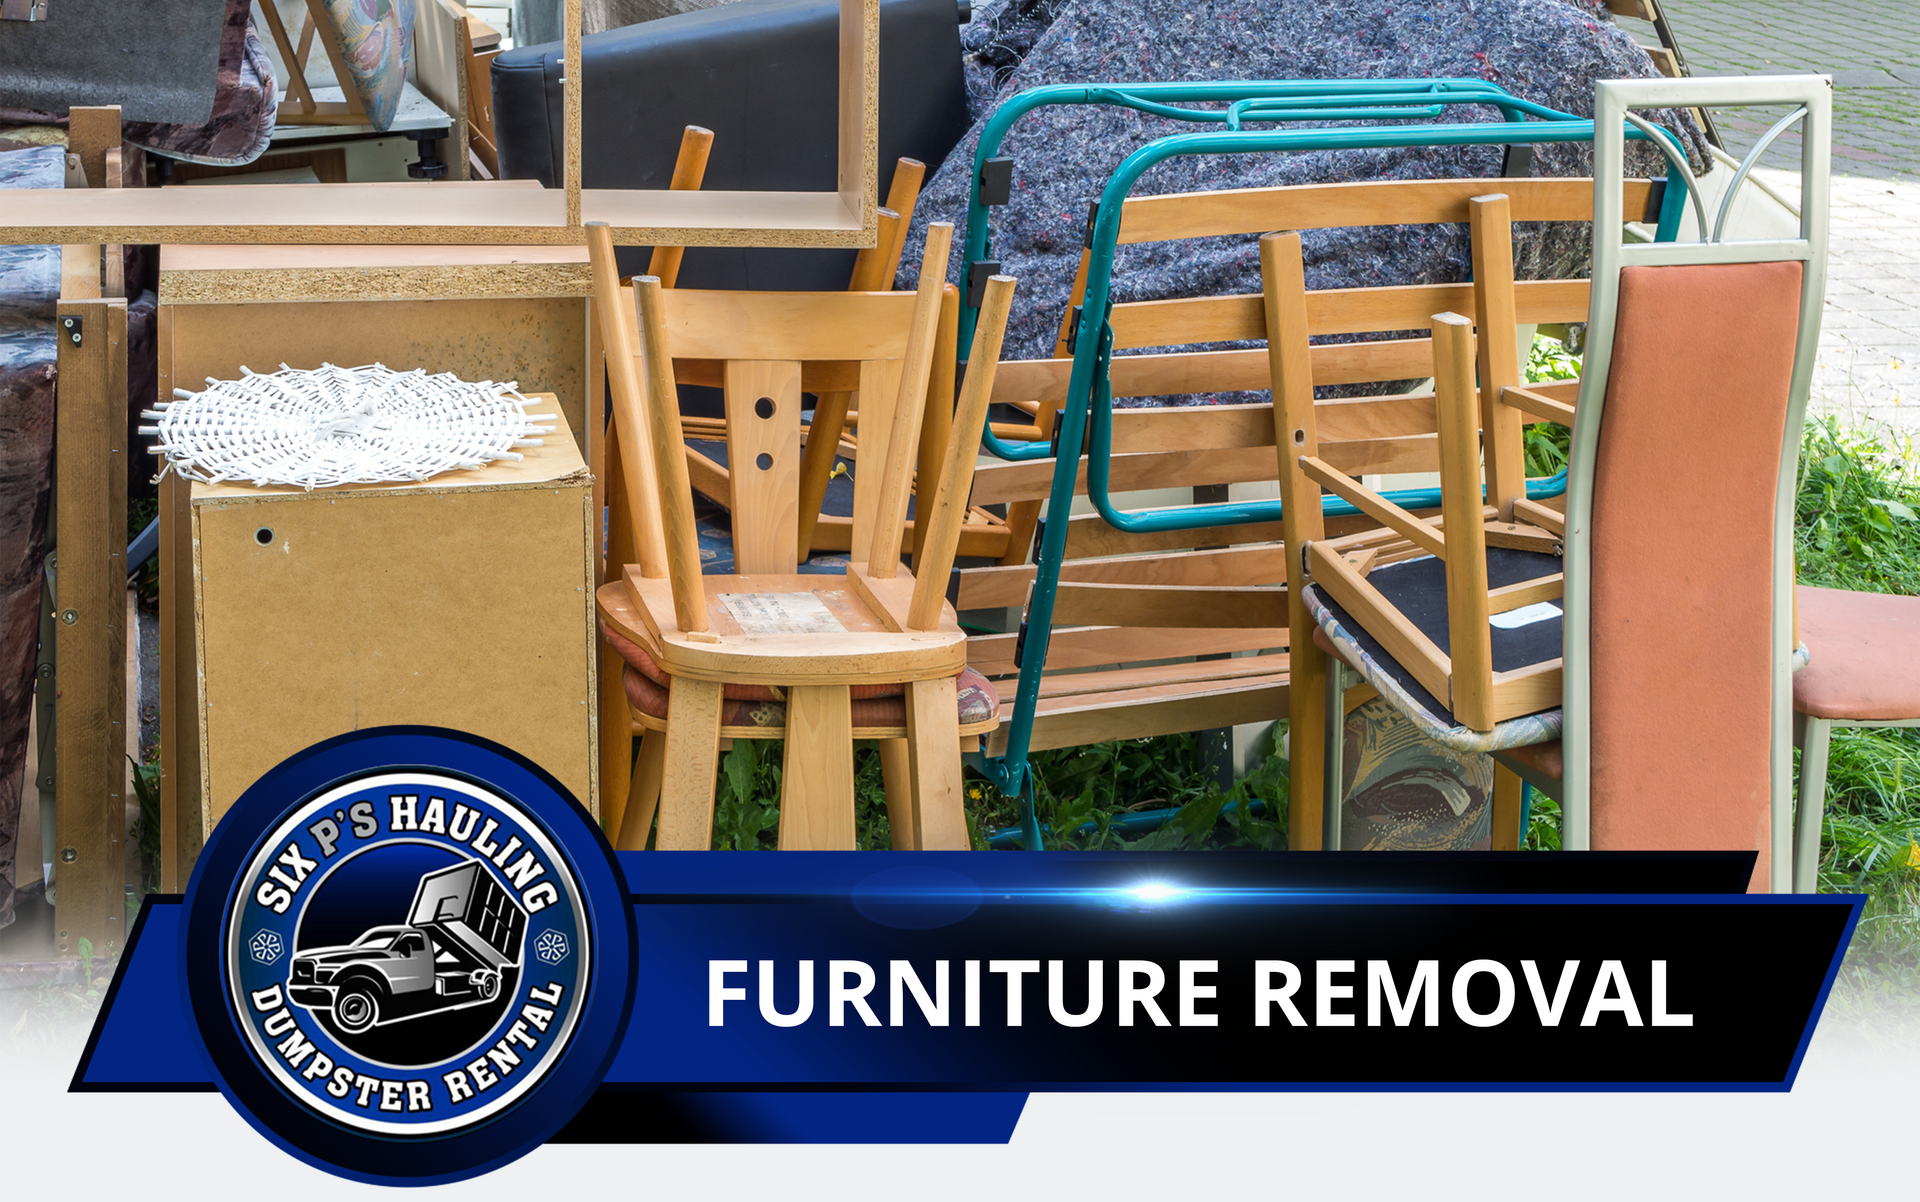 Furniture removal in Claremont, CA